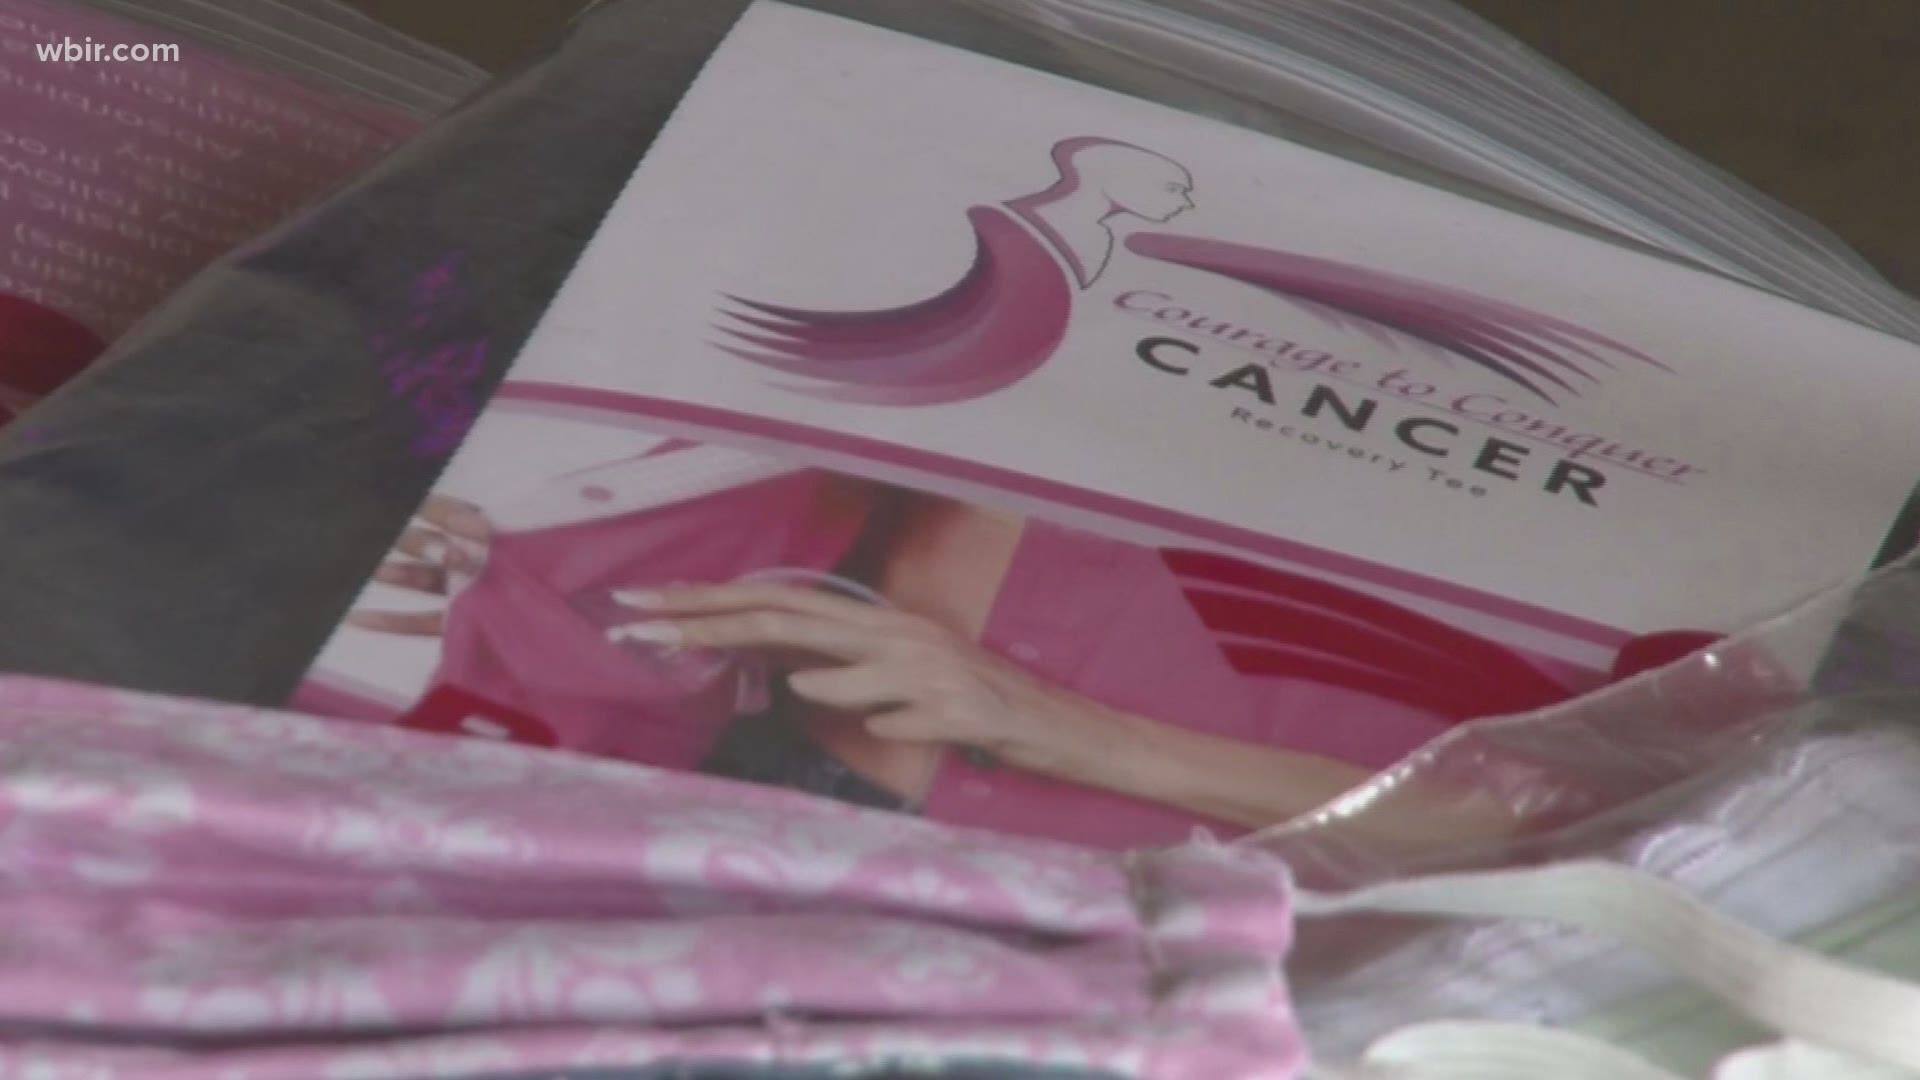 Two East Tennessee nonprofits are joining together to benefit breast cancer patients at a time when they need it most.